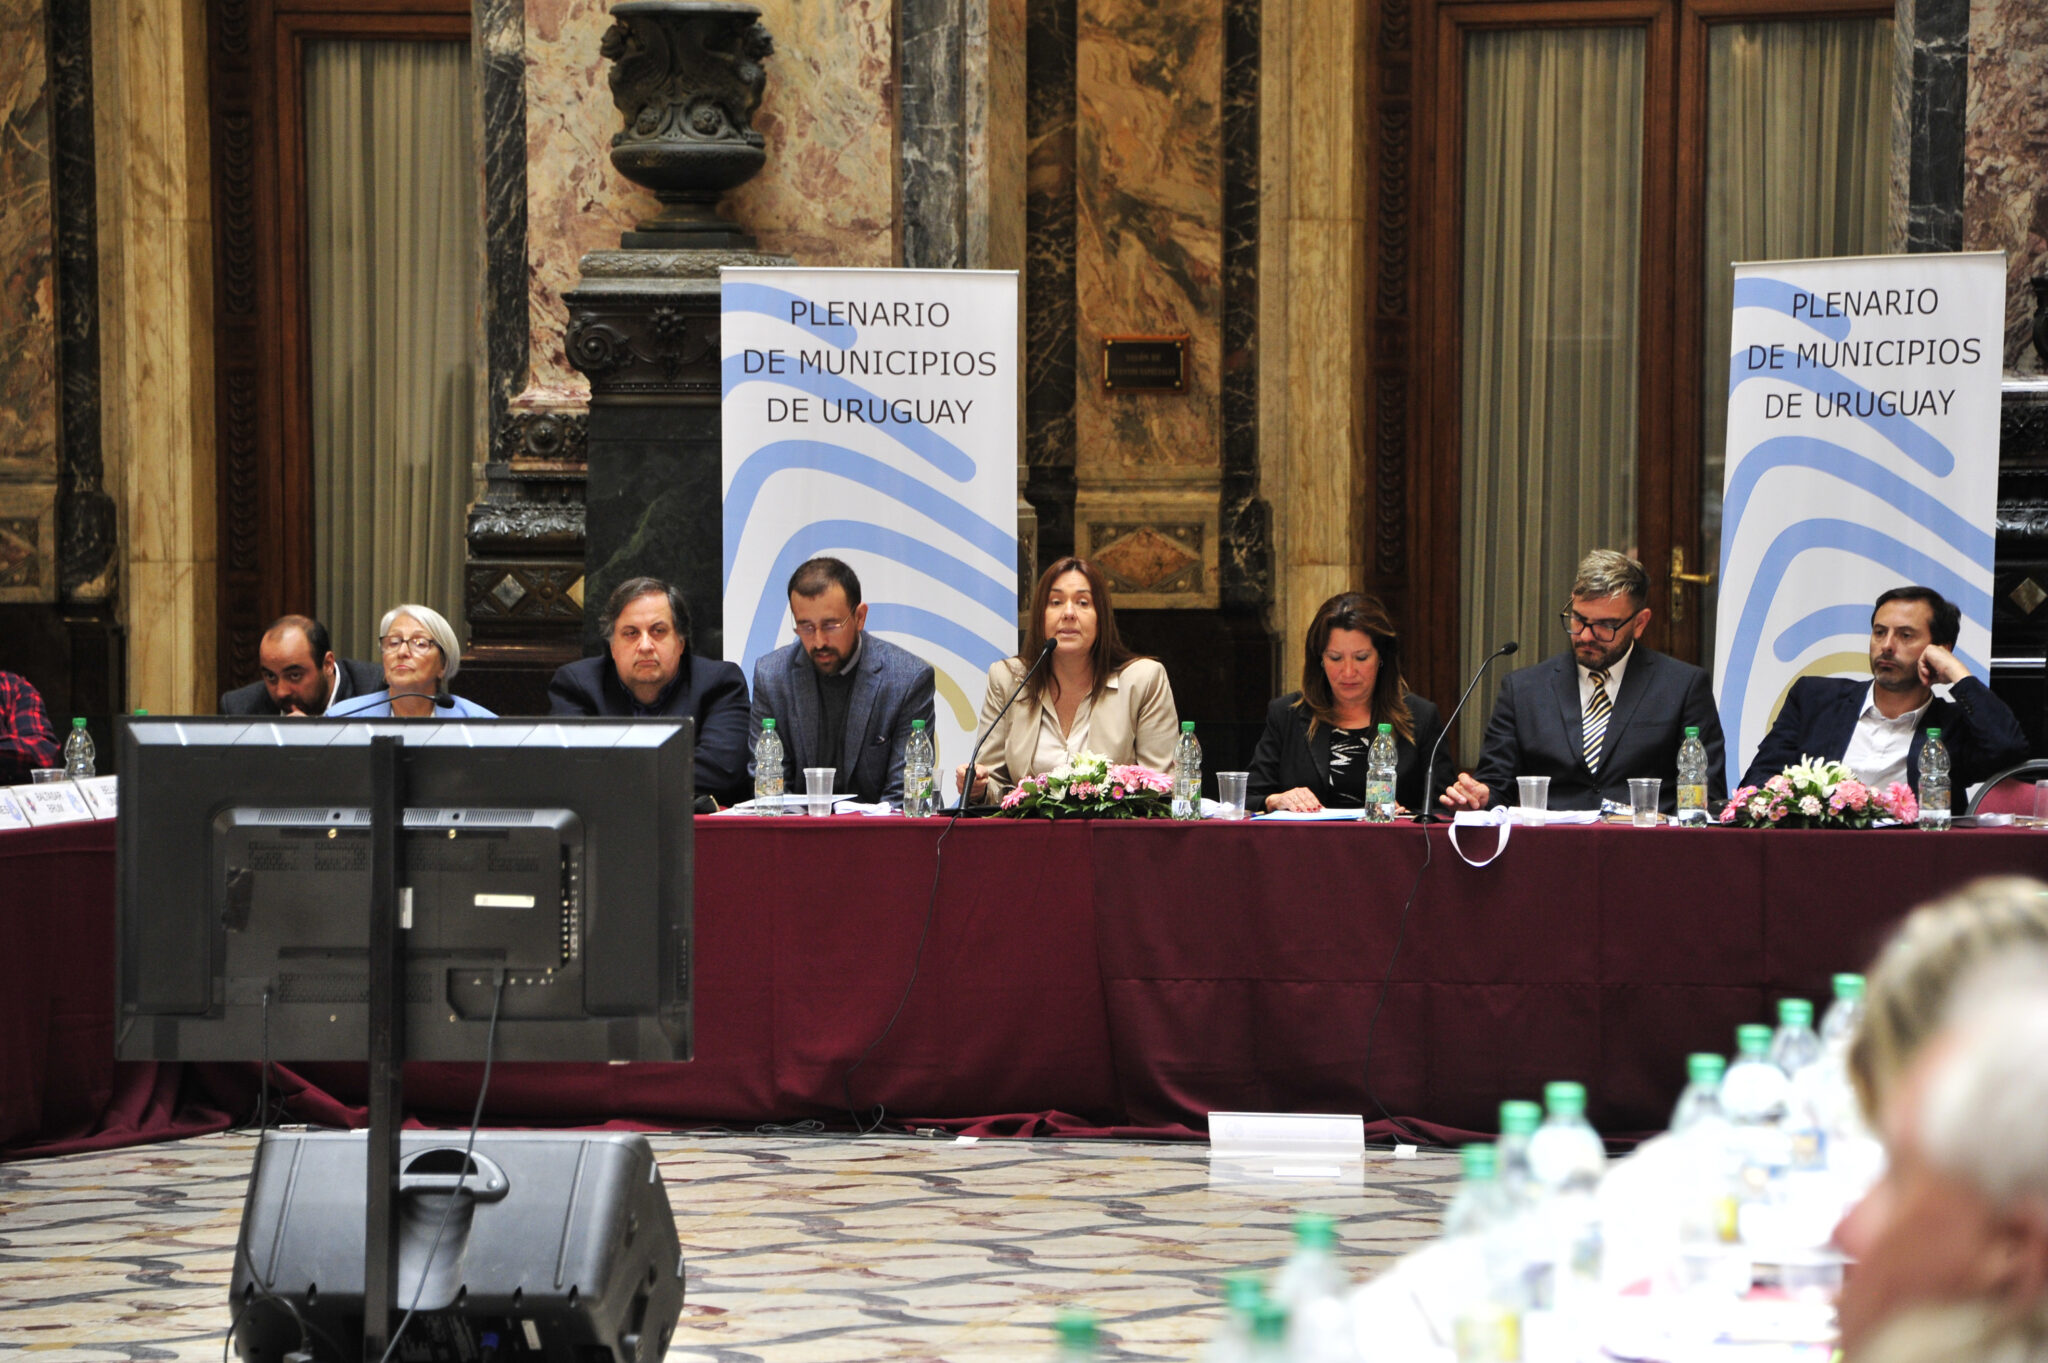 The eleventh session of the Plenary of Municipalities of Uruguay was held